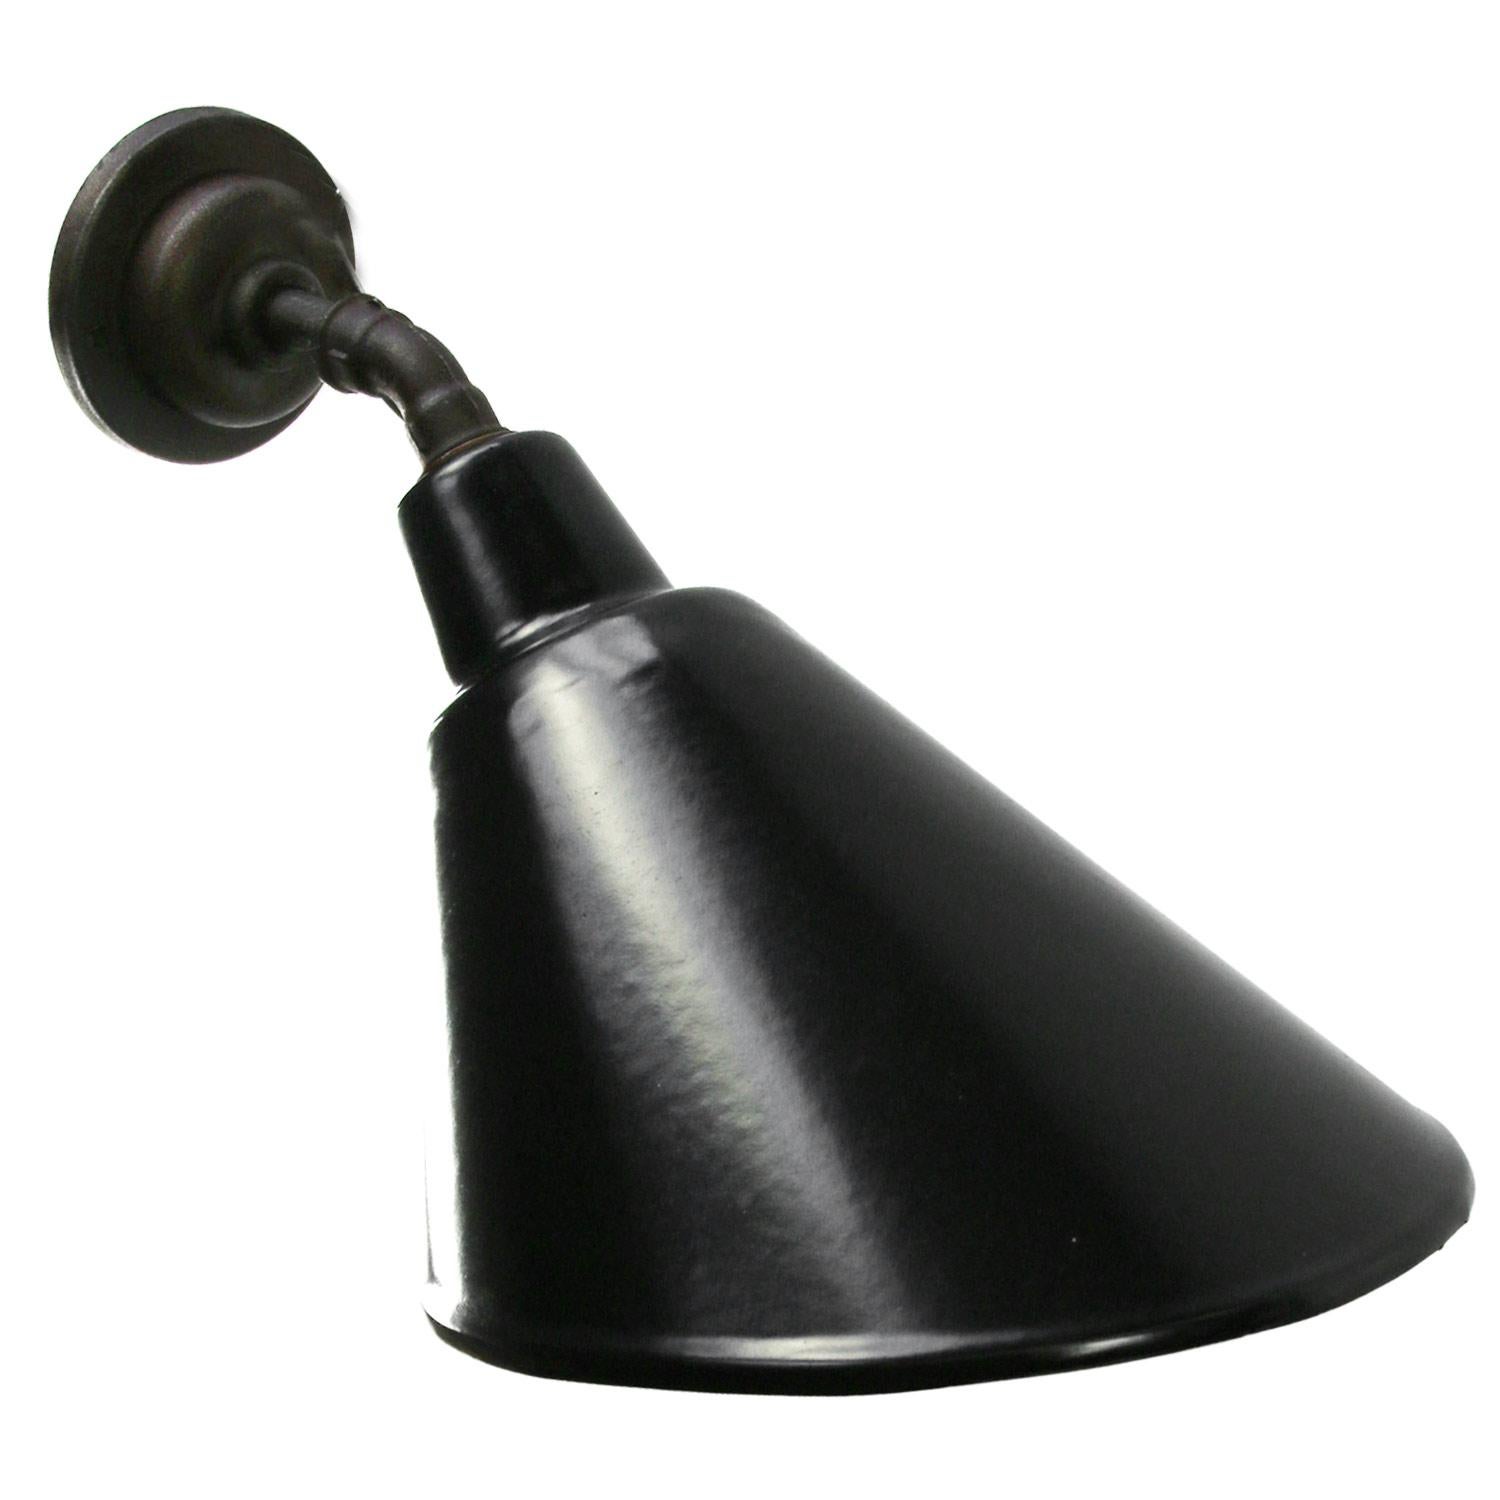 Factory wall light
black enamel, white interior

Diameter cast iron wall piece: 10.5 cm / 4”.
2 holes to secure

E27/E26

Weight: 2.00 kg / 4.4 lb

Priced per individual item. All lamps have been made suitable by international standards for